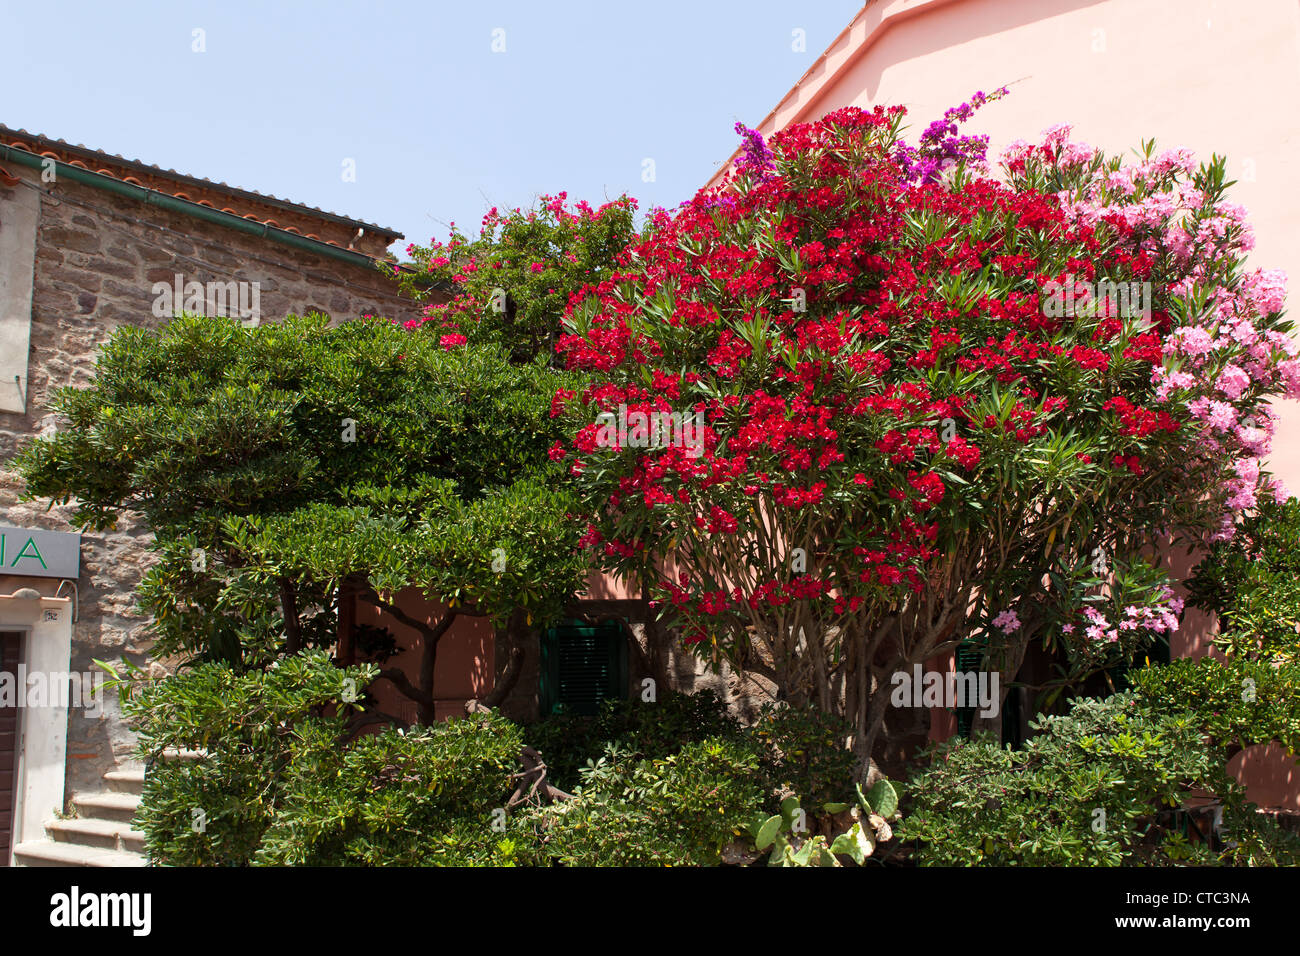 Beautiful red and pink oleander bushes in bloom at Capraia Island, Tuscan Archipelago, Italy. Stock Photo